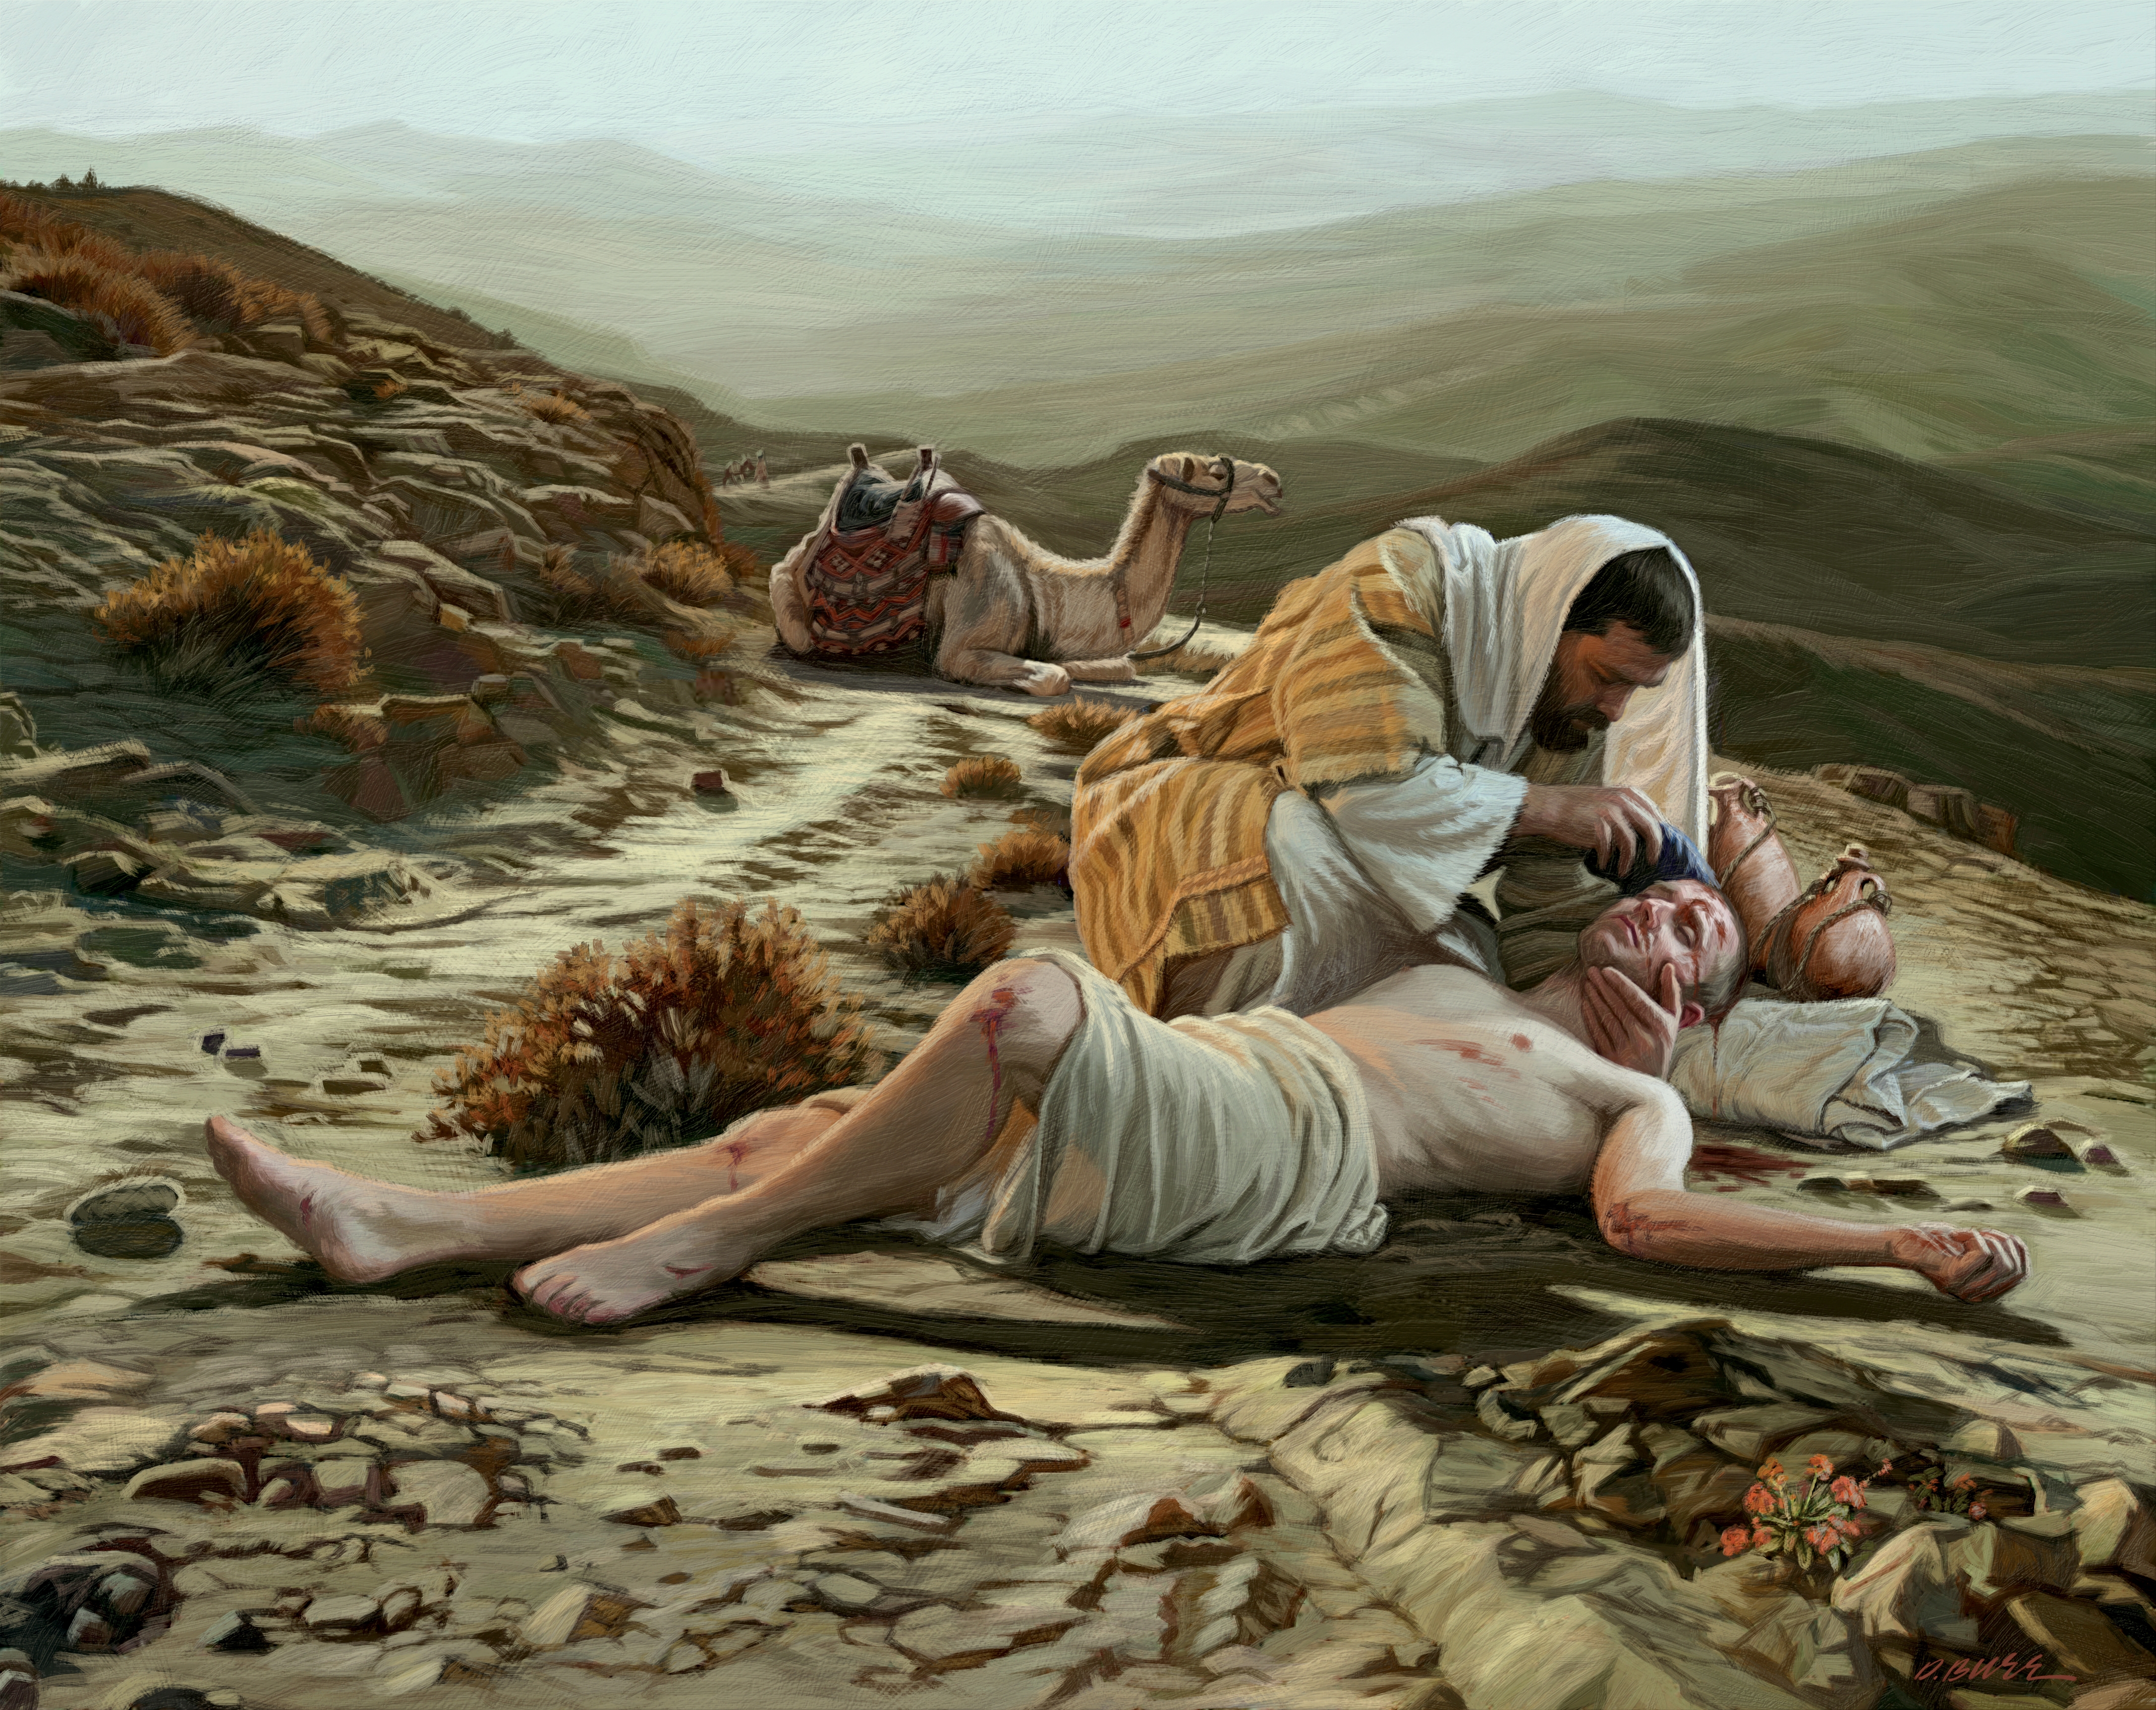 A painting of the good Samaritan helping a wounded man on the road.